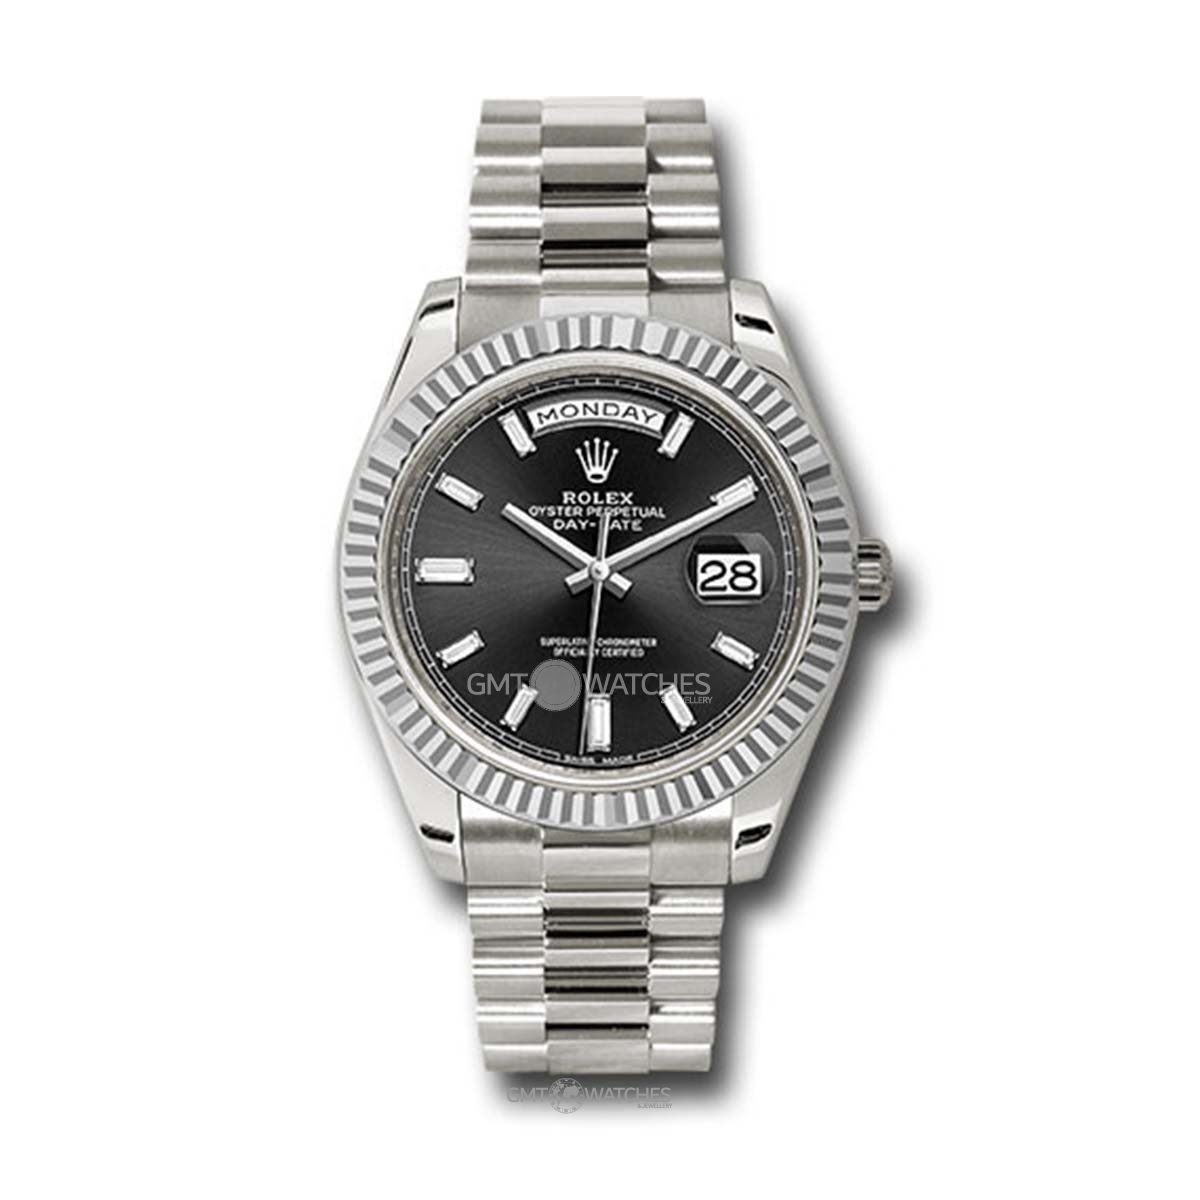 Rolex Oyster Perpetual Day-Date 40mm 18k White Gold 228239 bkbdp